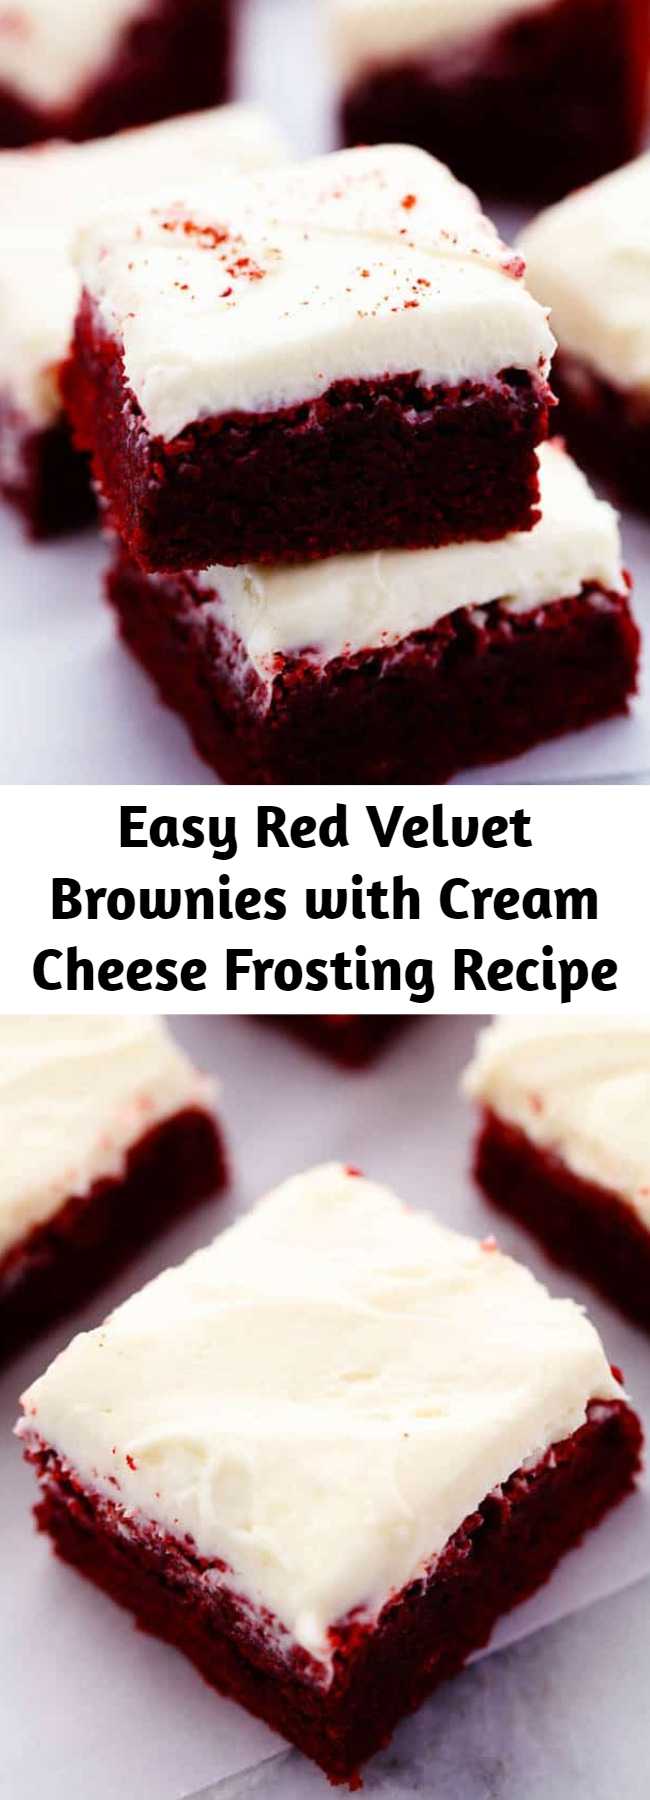 Easy Red Velvet Brownies with Cream Cheese Frosting Recipe - These red velvet brownies are seriously the perfect brownie recipe! Perfectly moist and chewy with the bright red color. The cream cheese frosting is the perfect finishing touch! These are AMAZING!